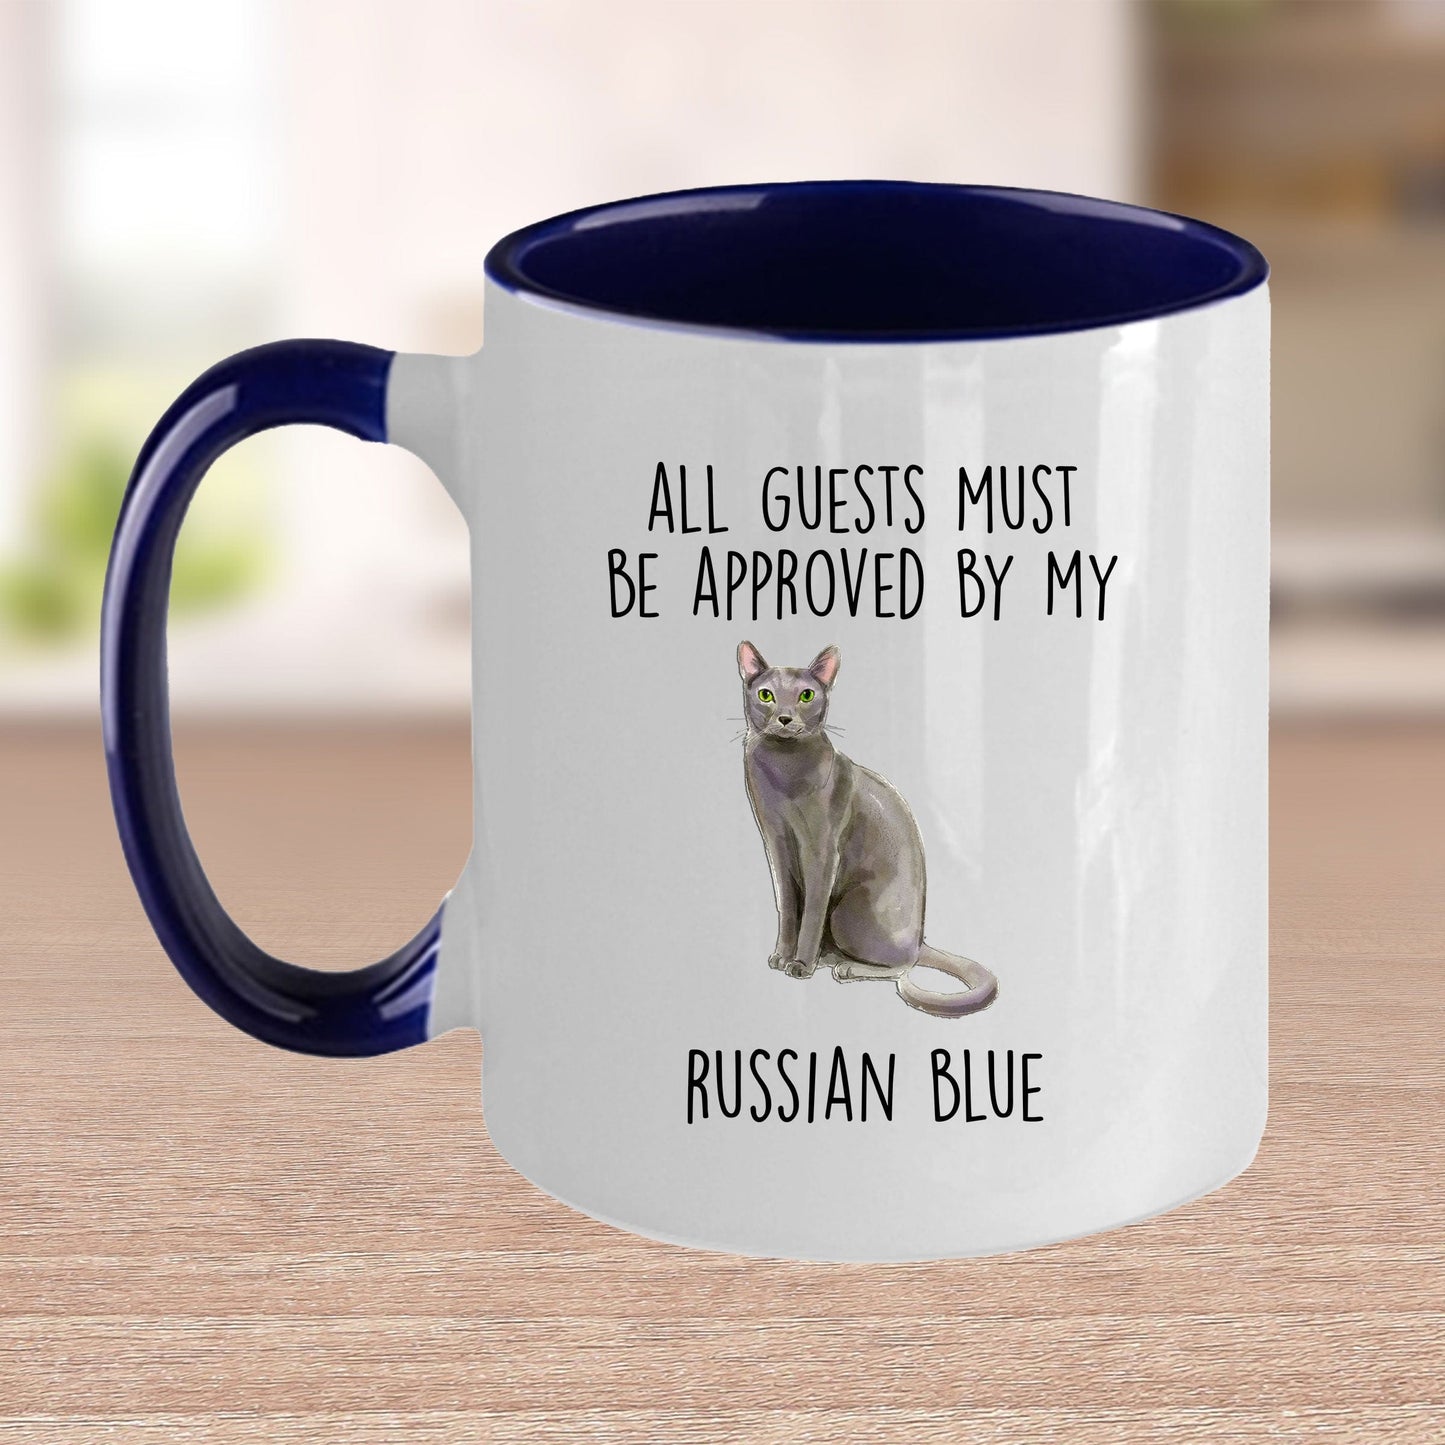 Russian Blue Cat Funny Coffee Mug - All Guests Must be Approved